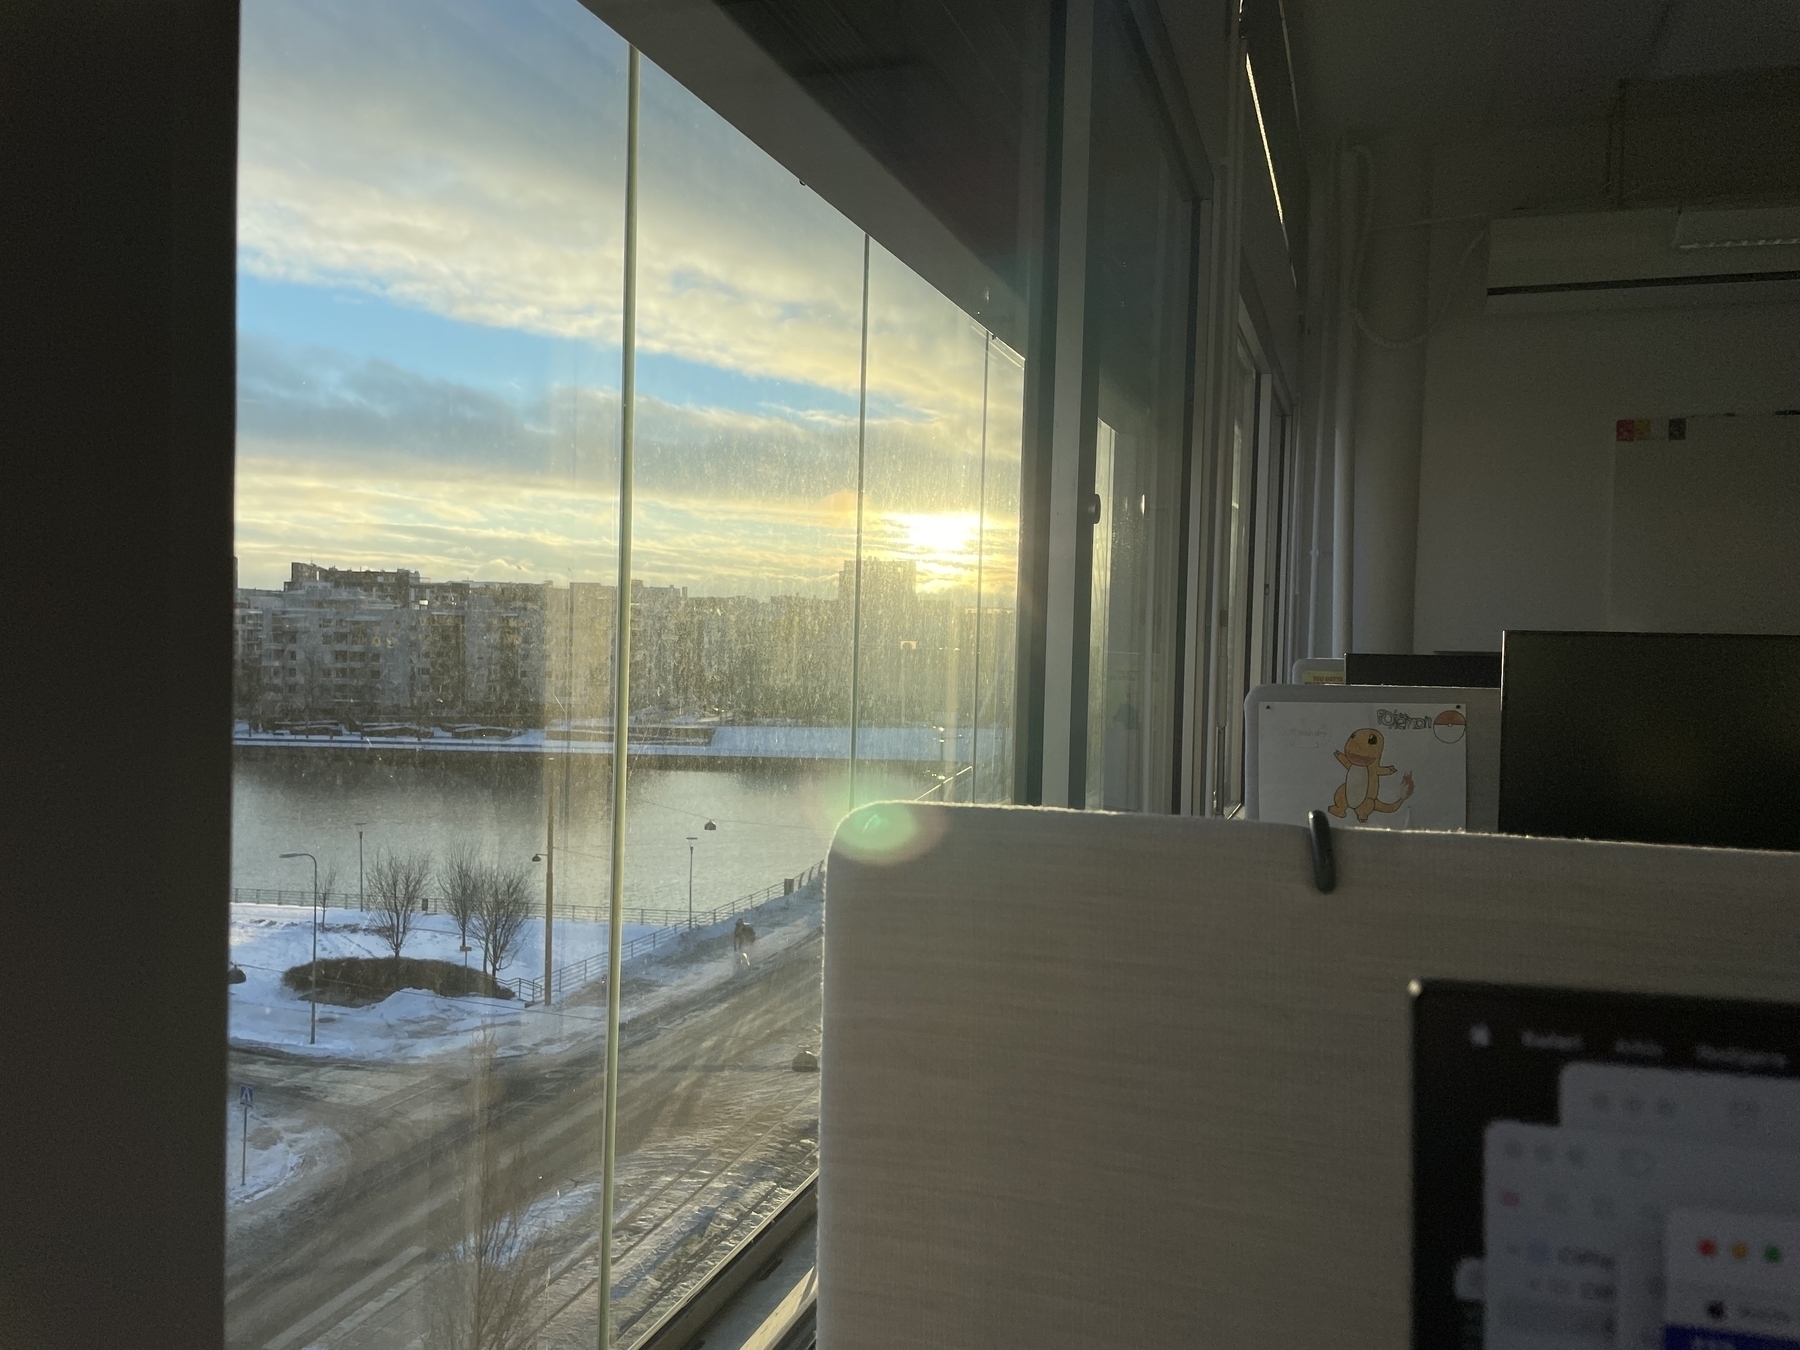 View from an office window. Sunrise over a city landscape (Jätkäsaari, Helsinki). There is a canal crossing the view and snow on the ground. 